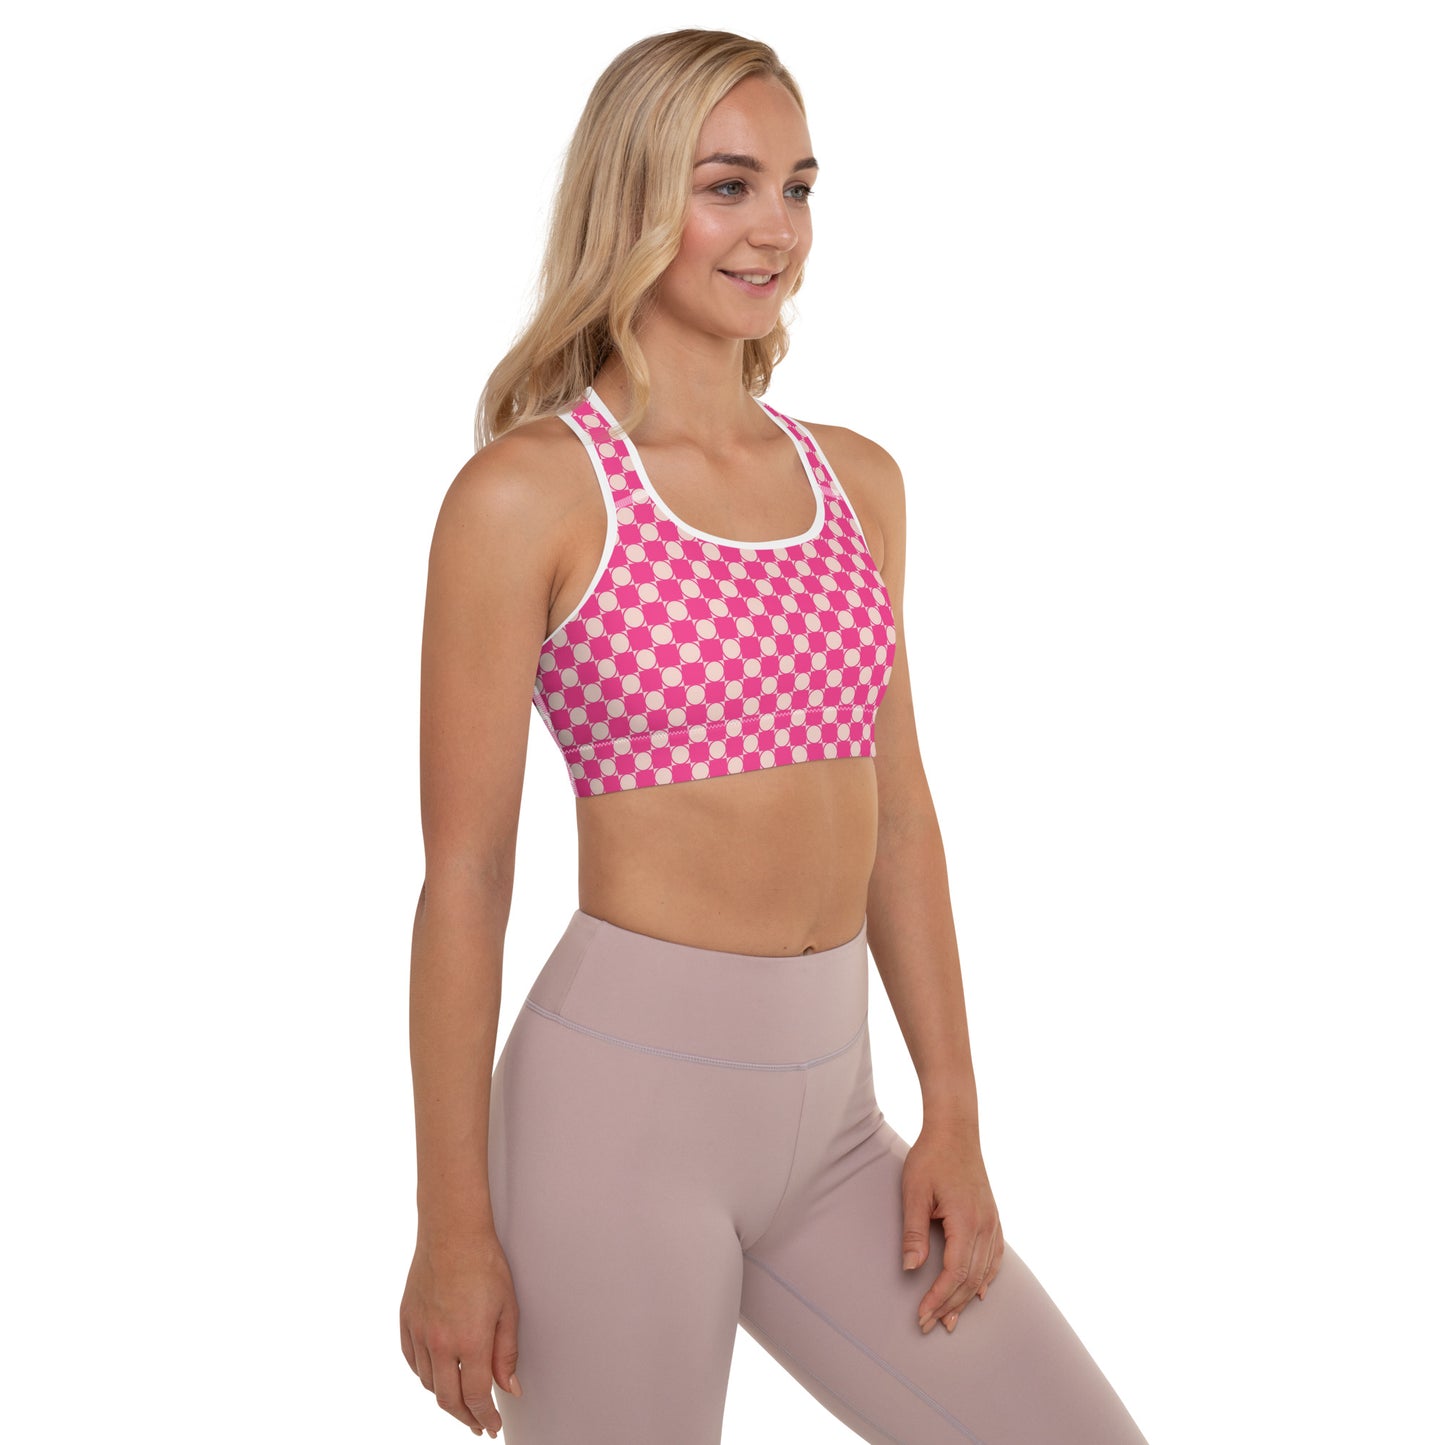 Checkered Padded Sports Bra in PInks